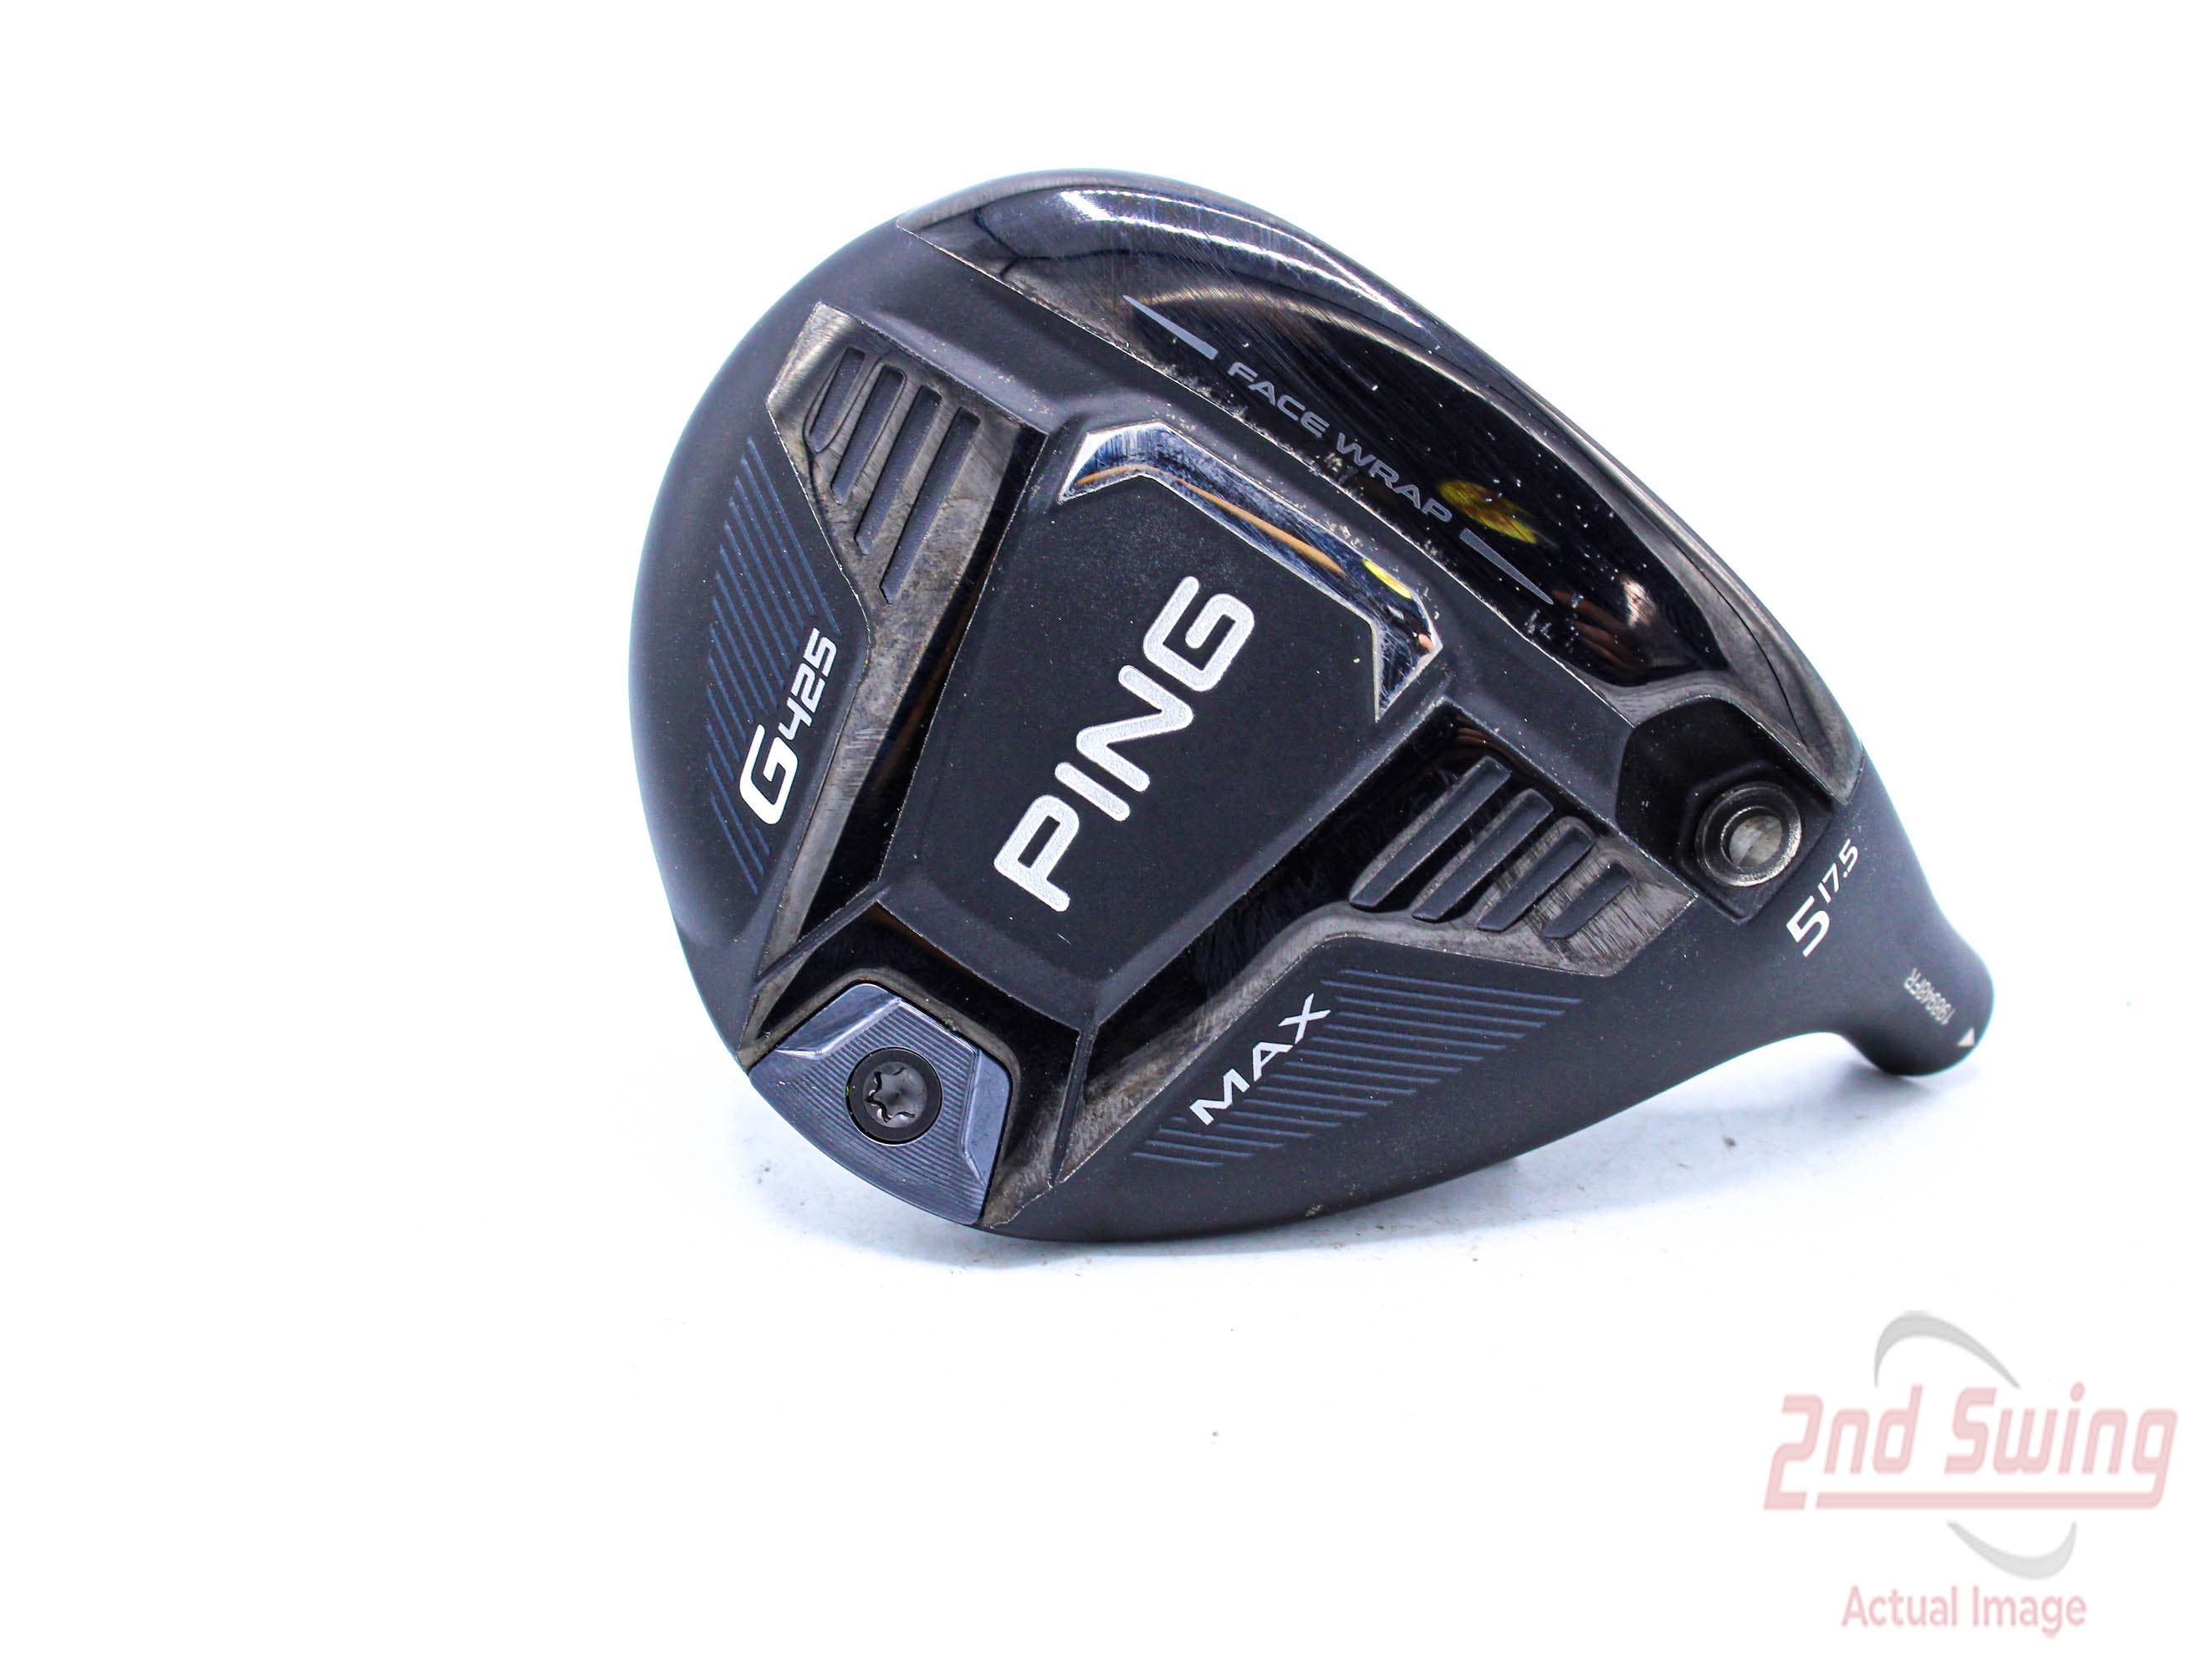 Ping G425 Max Fairway Wood 5 Wood 5W 17.5° Right Handed ***HEAD ONLY***  MISSING SCREW